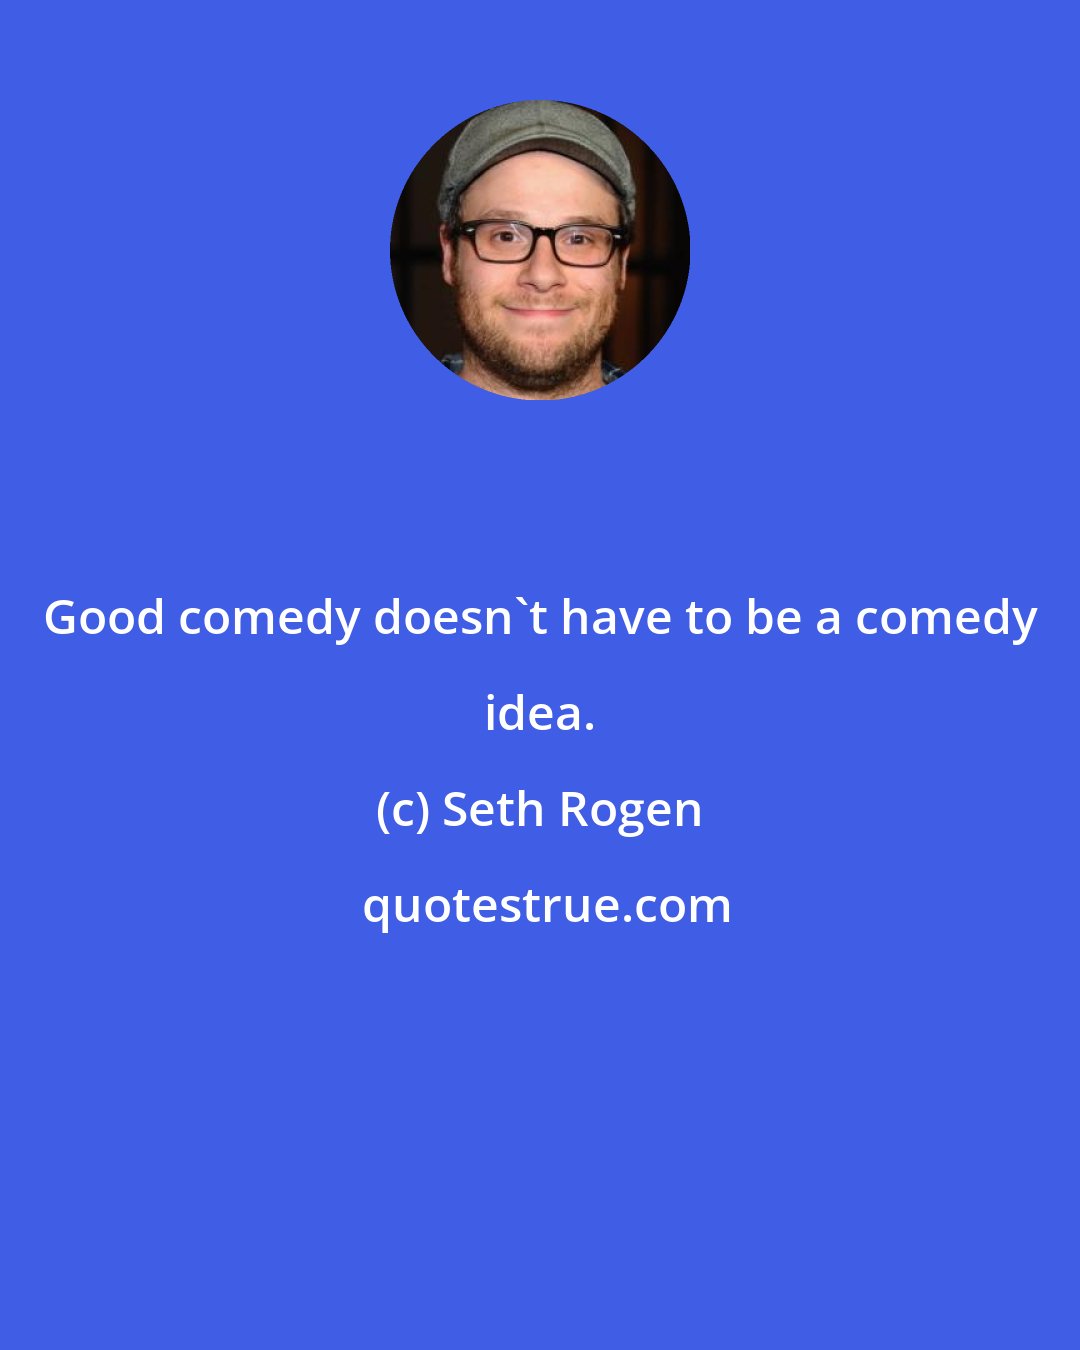 Seth Rogen: Good comedy doesn't have to be a comedy idea.